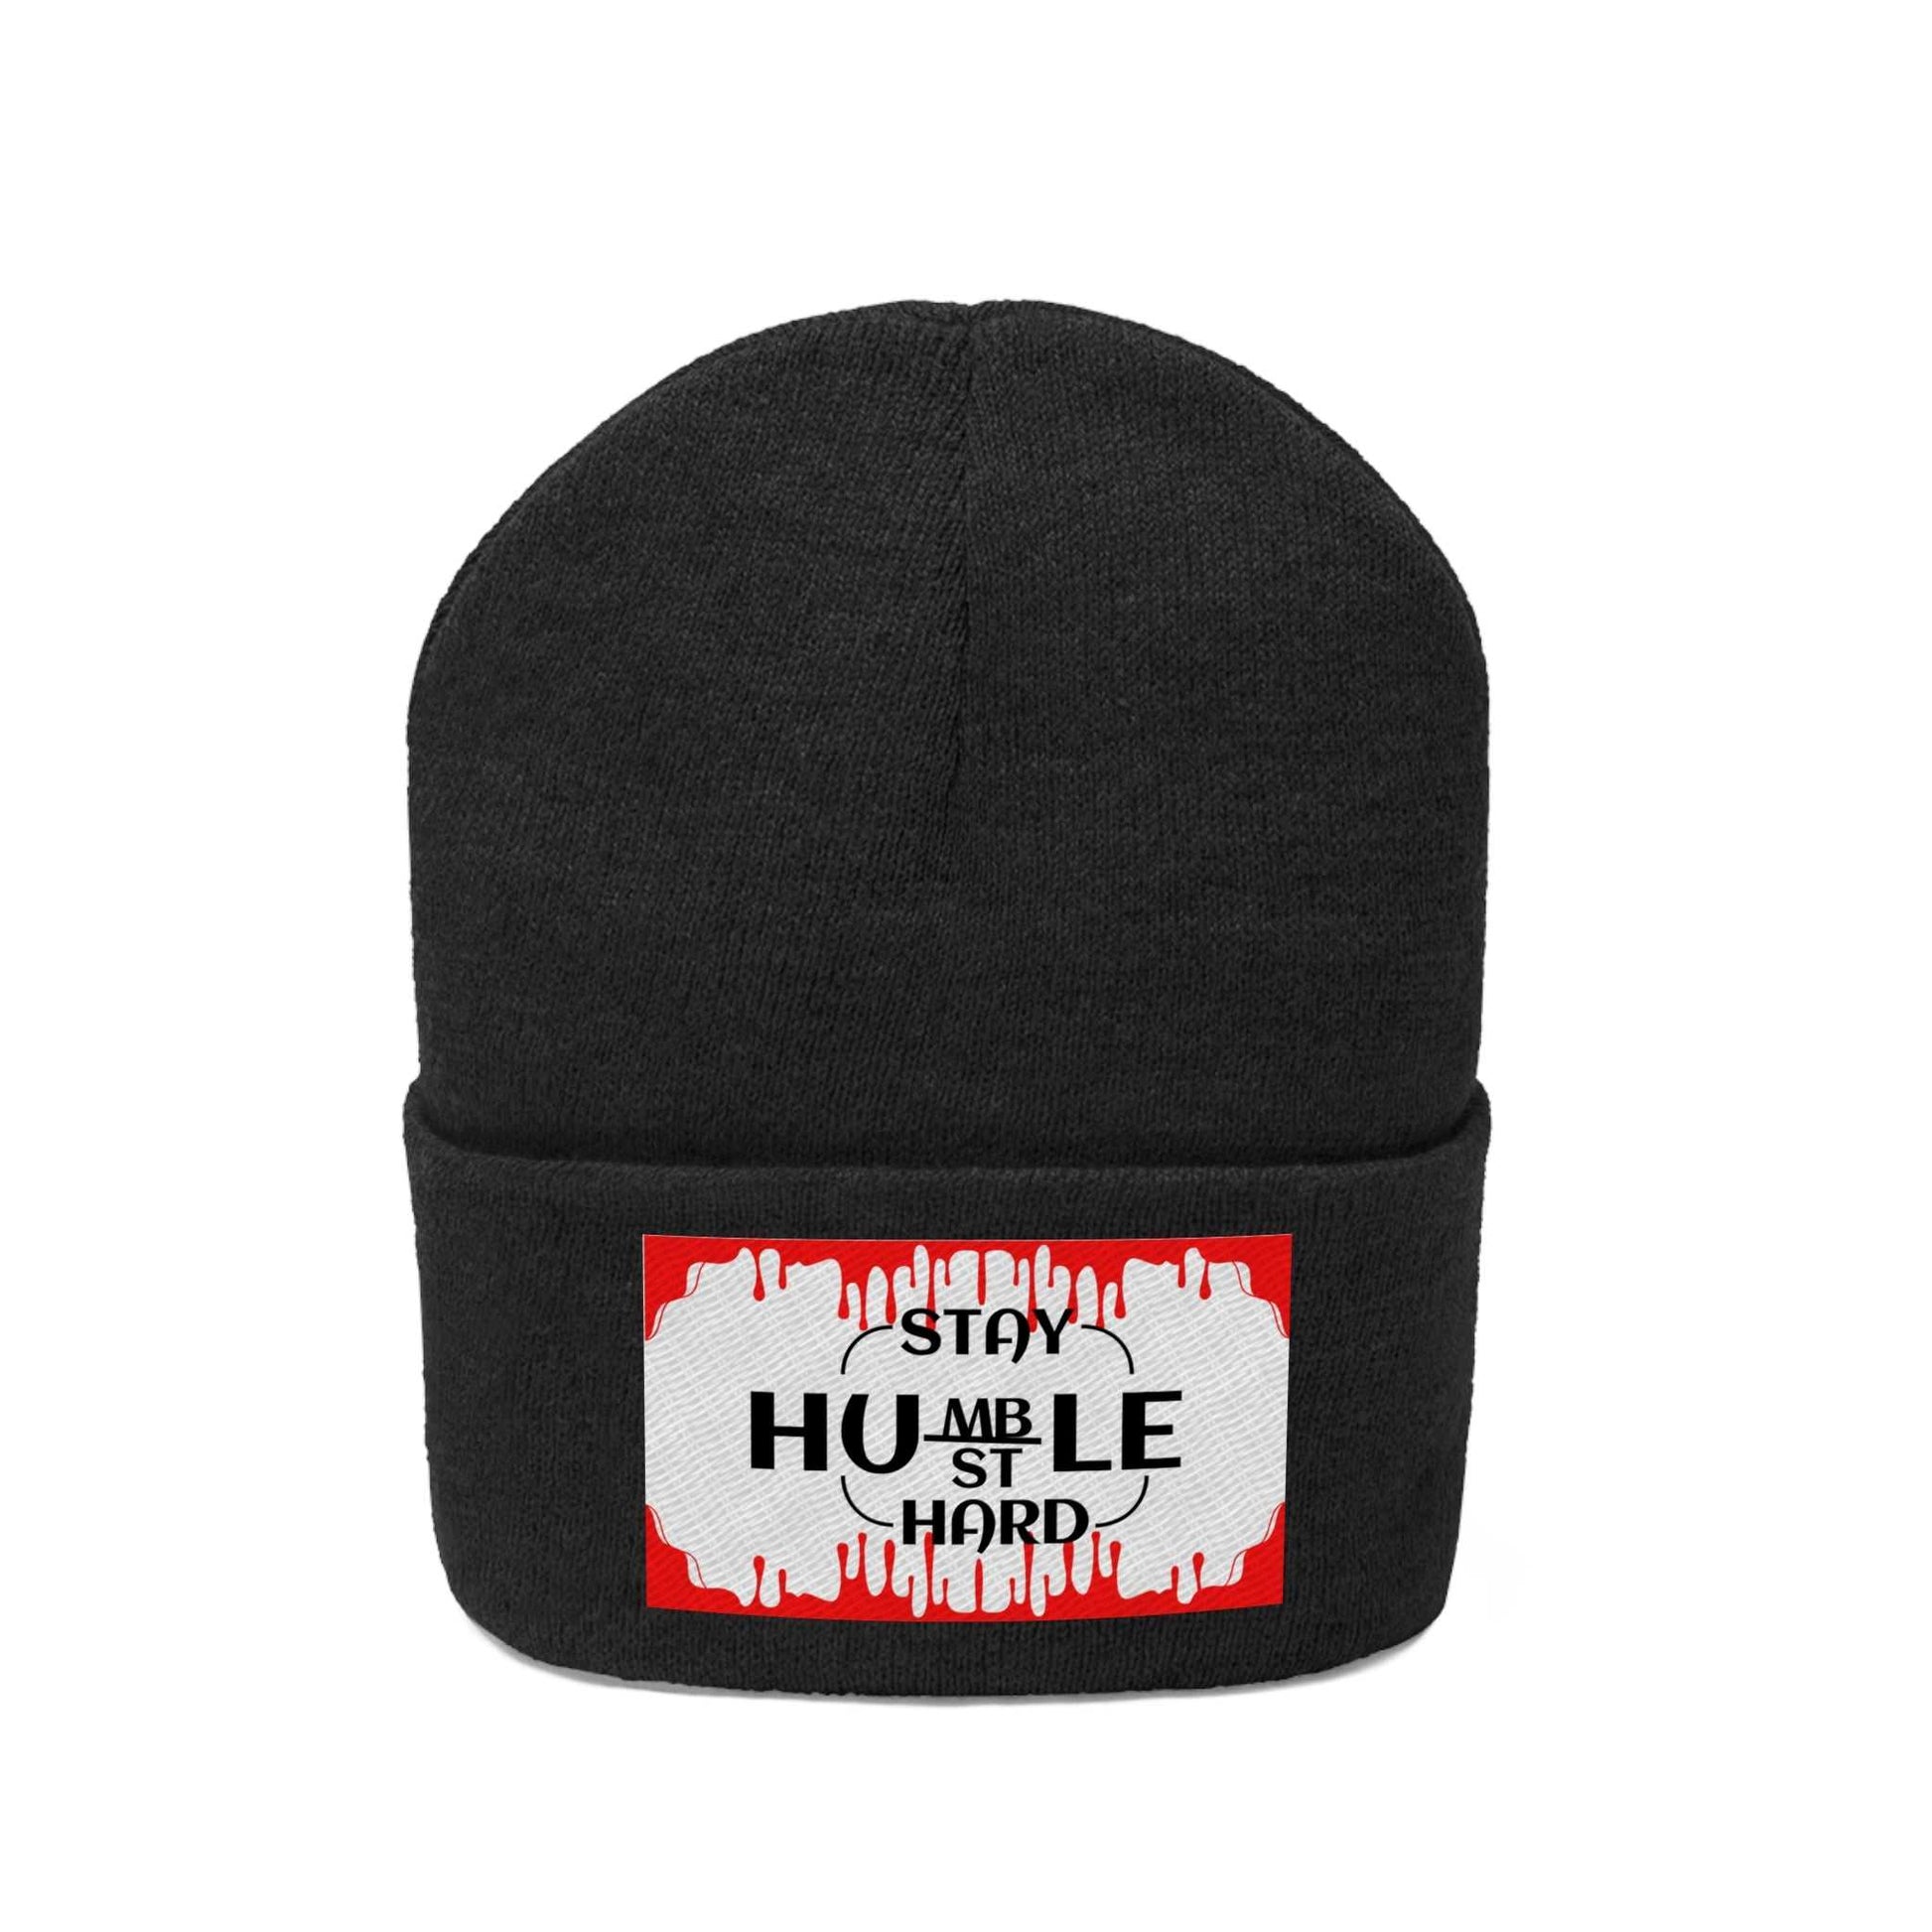 Stay Humble Hustle Hard Knit Beanie Motivation on the Go!! Hats Good Vibes Daily Lab 18